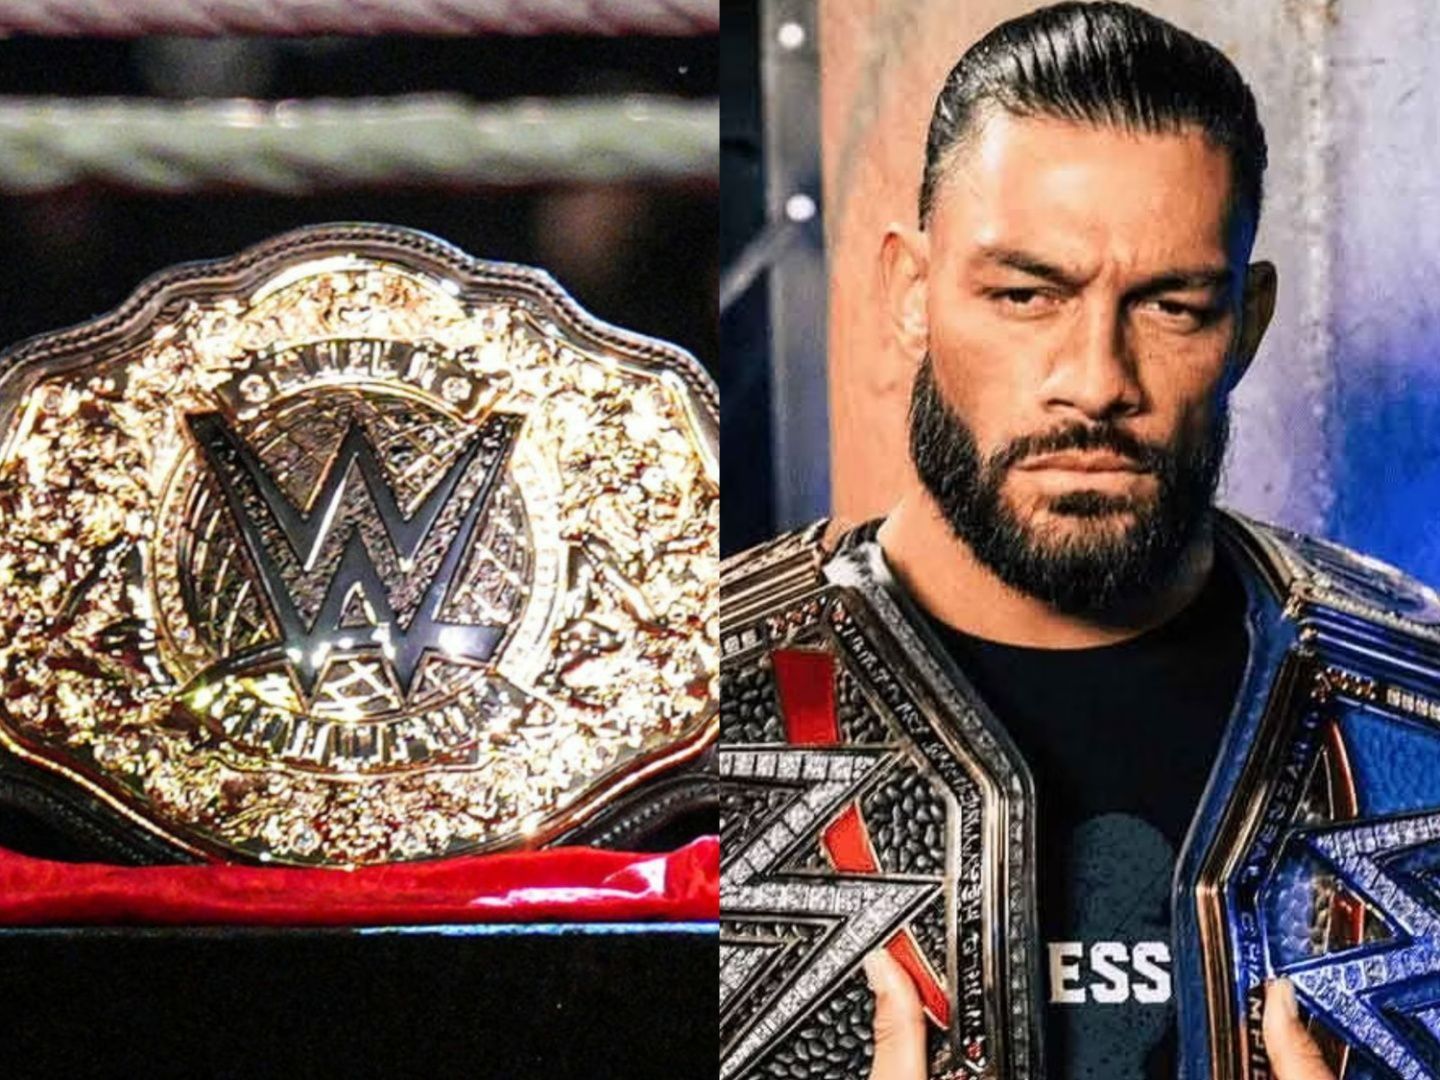 The World Heavyweight Championship and the Undisputed WWE Universal Champion Roman Reigns.